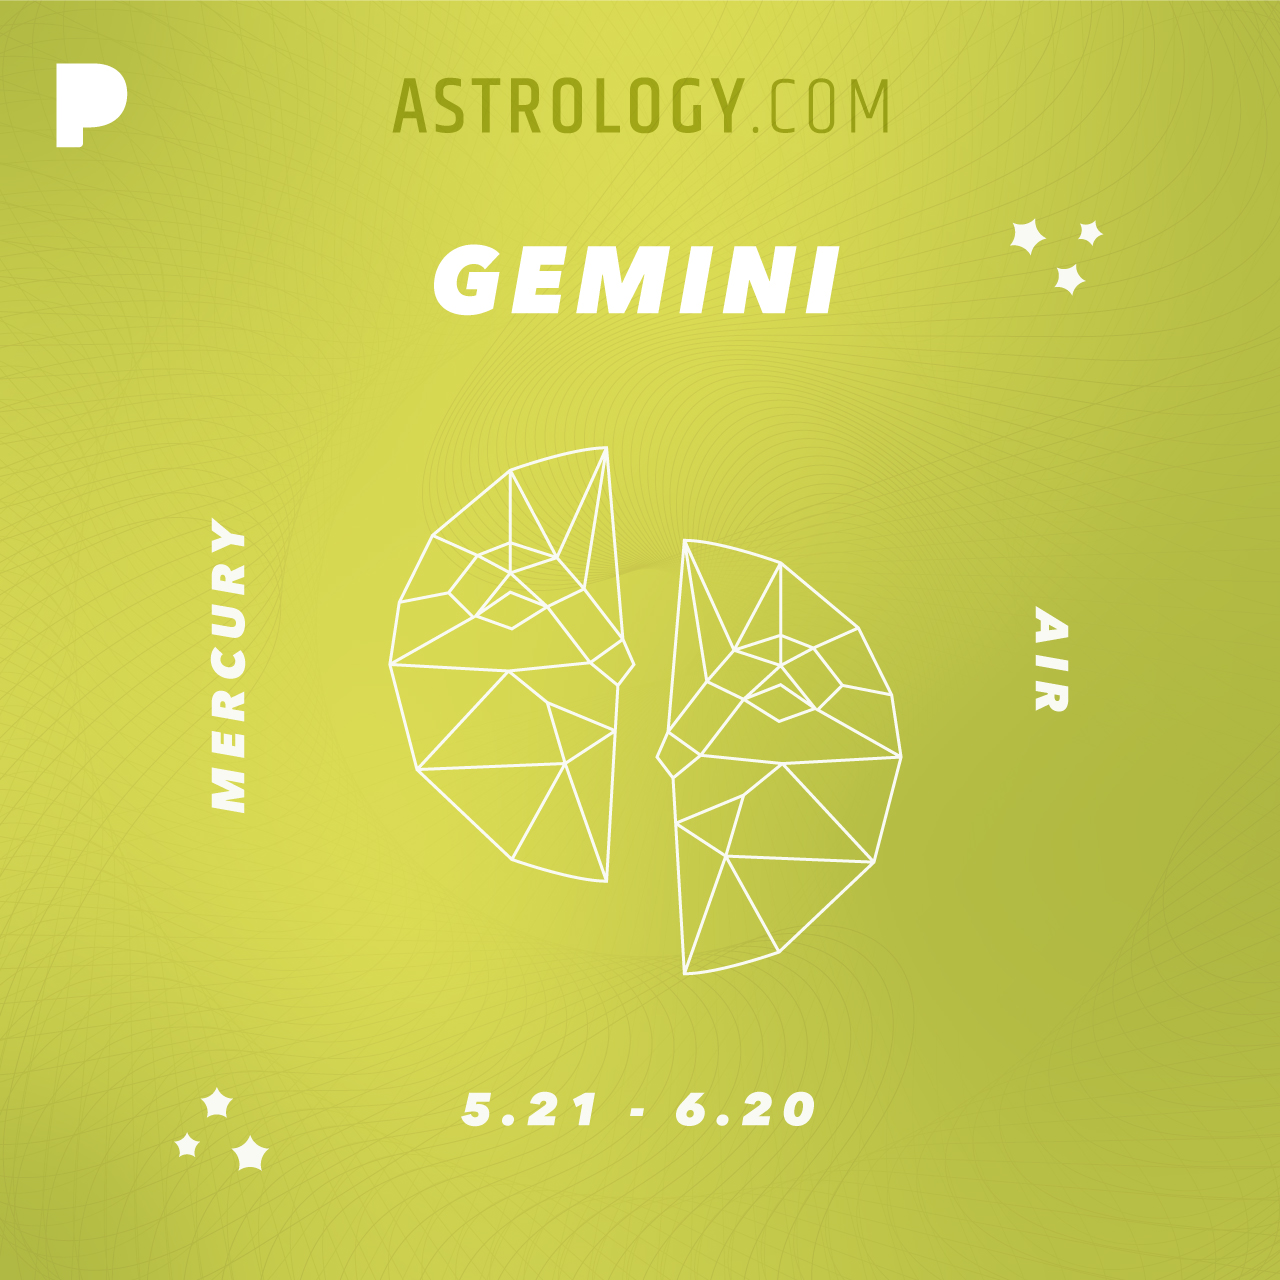 We Partnered With Pandora to Create a Gemini Playlist Primed for the Fun Season Ahead